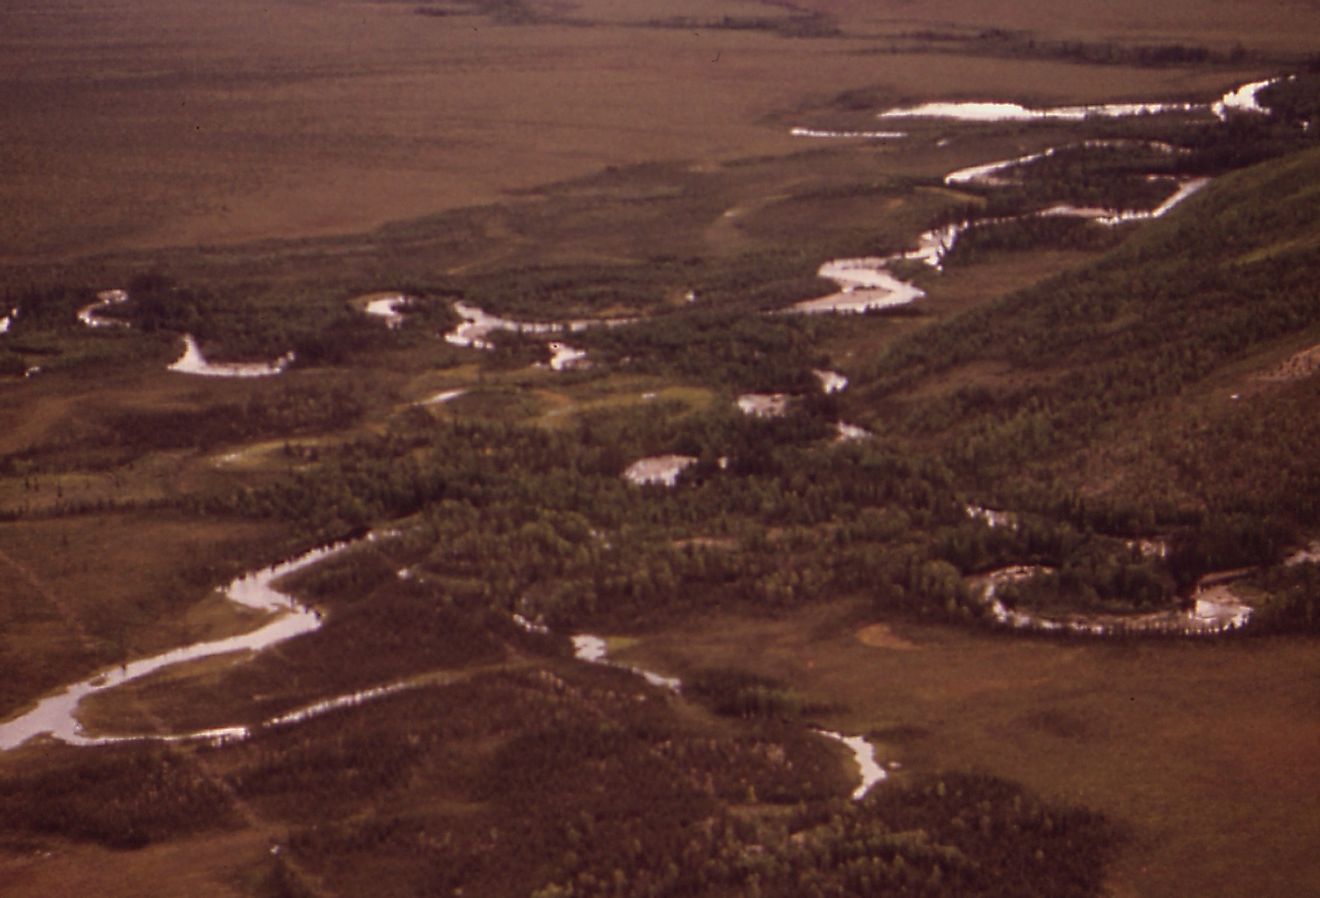 Aerial view of the crossing of the west fork of the Dall River in Alaska.